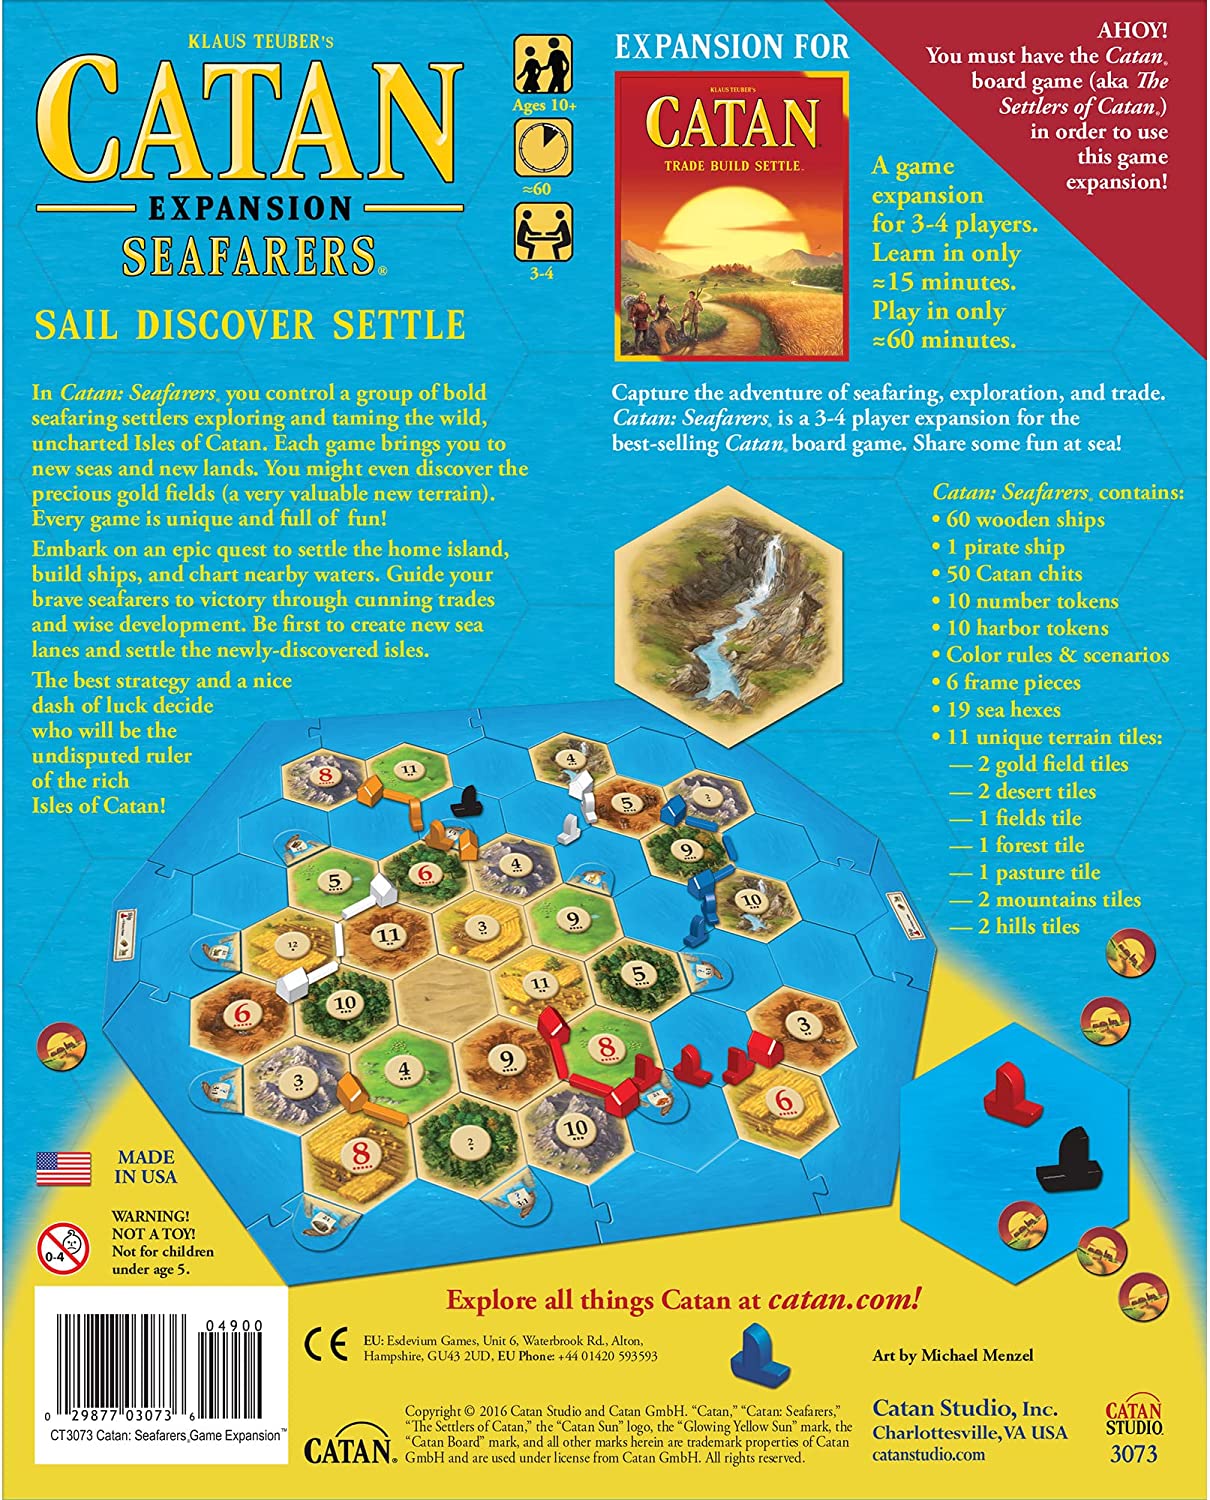 Catan: Seafarers Expansion (5th Edition) back of box